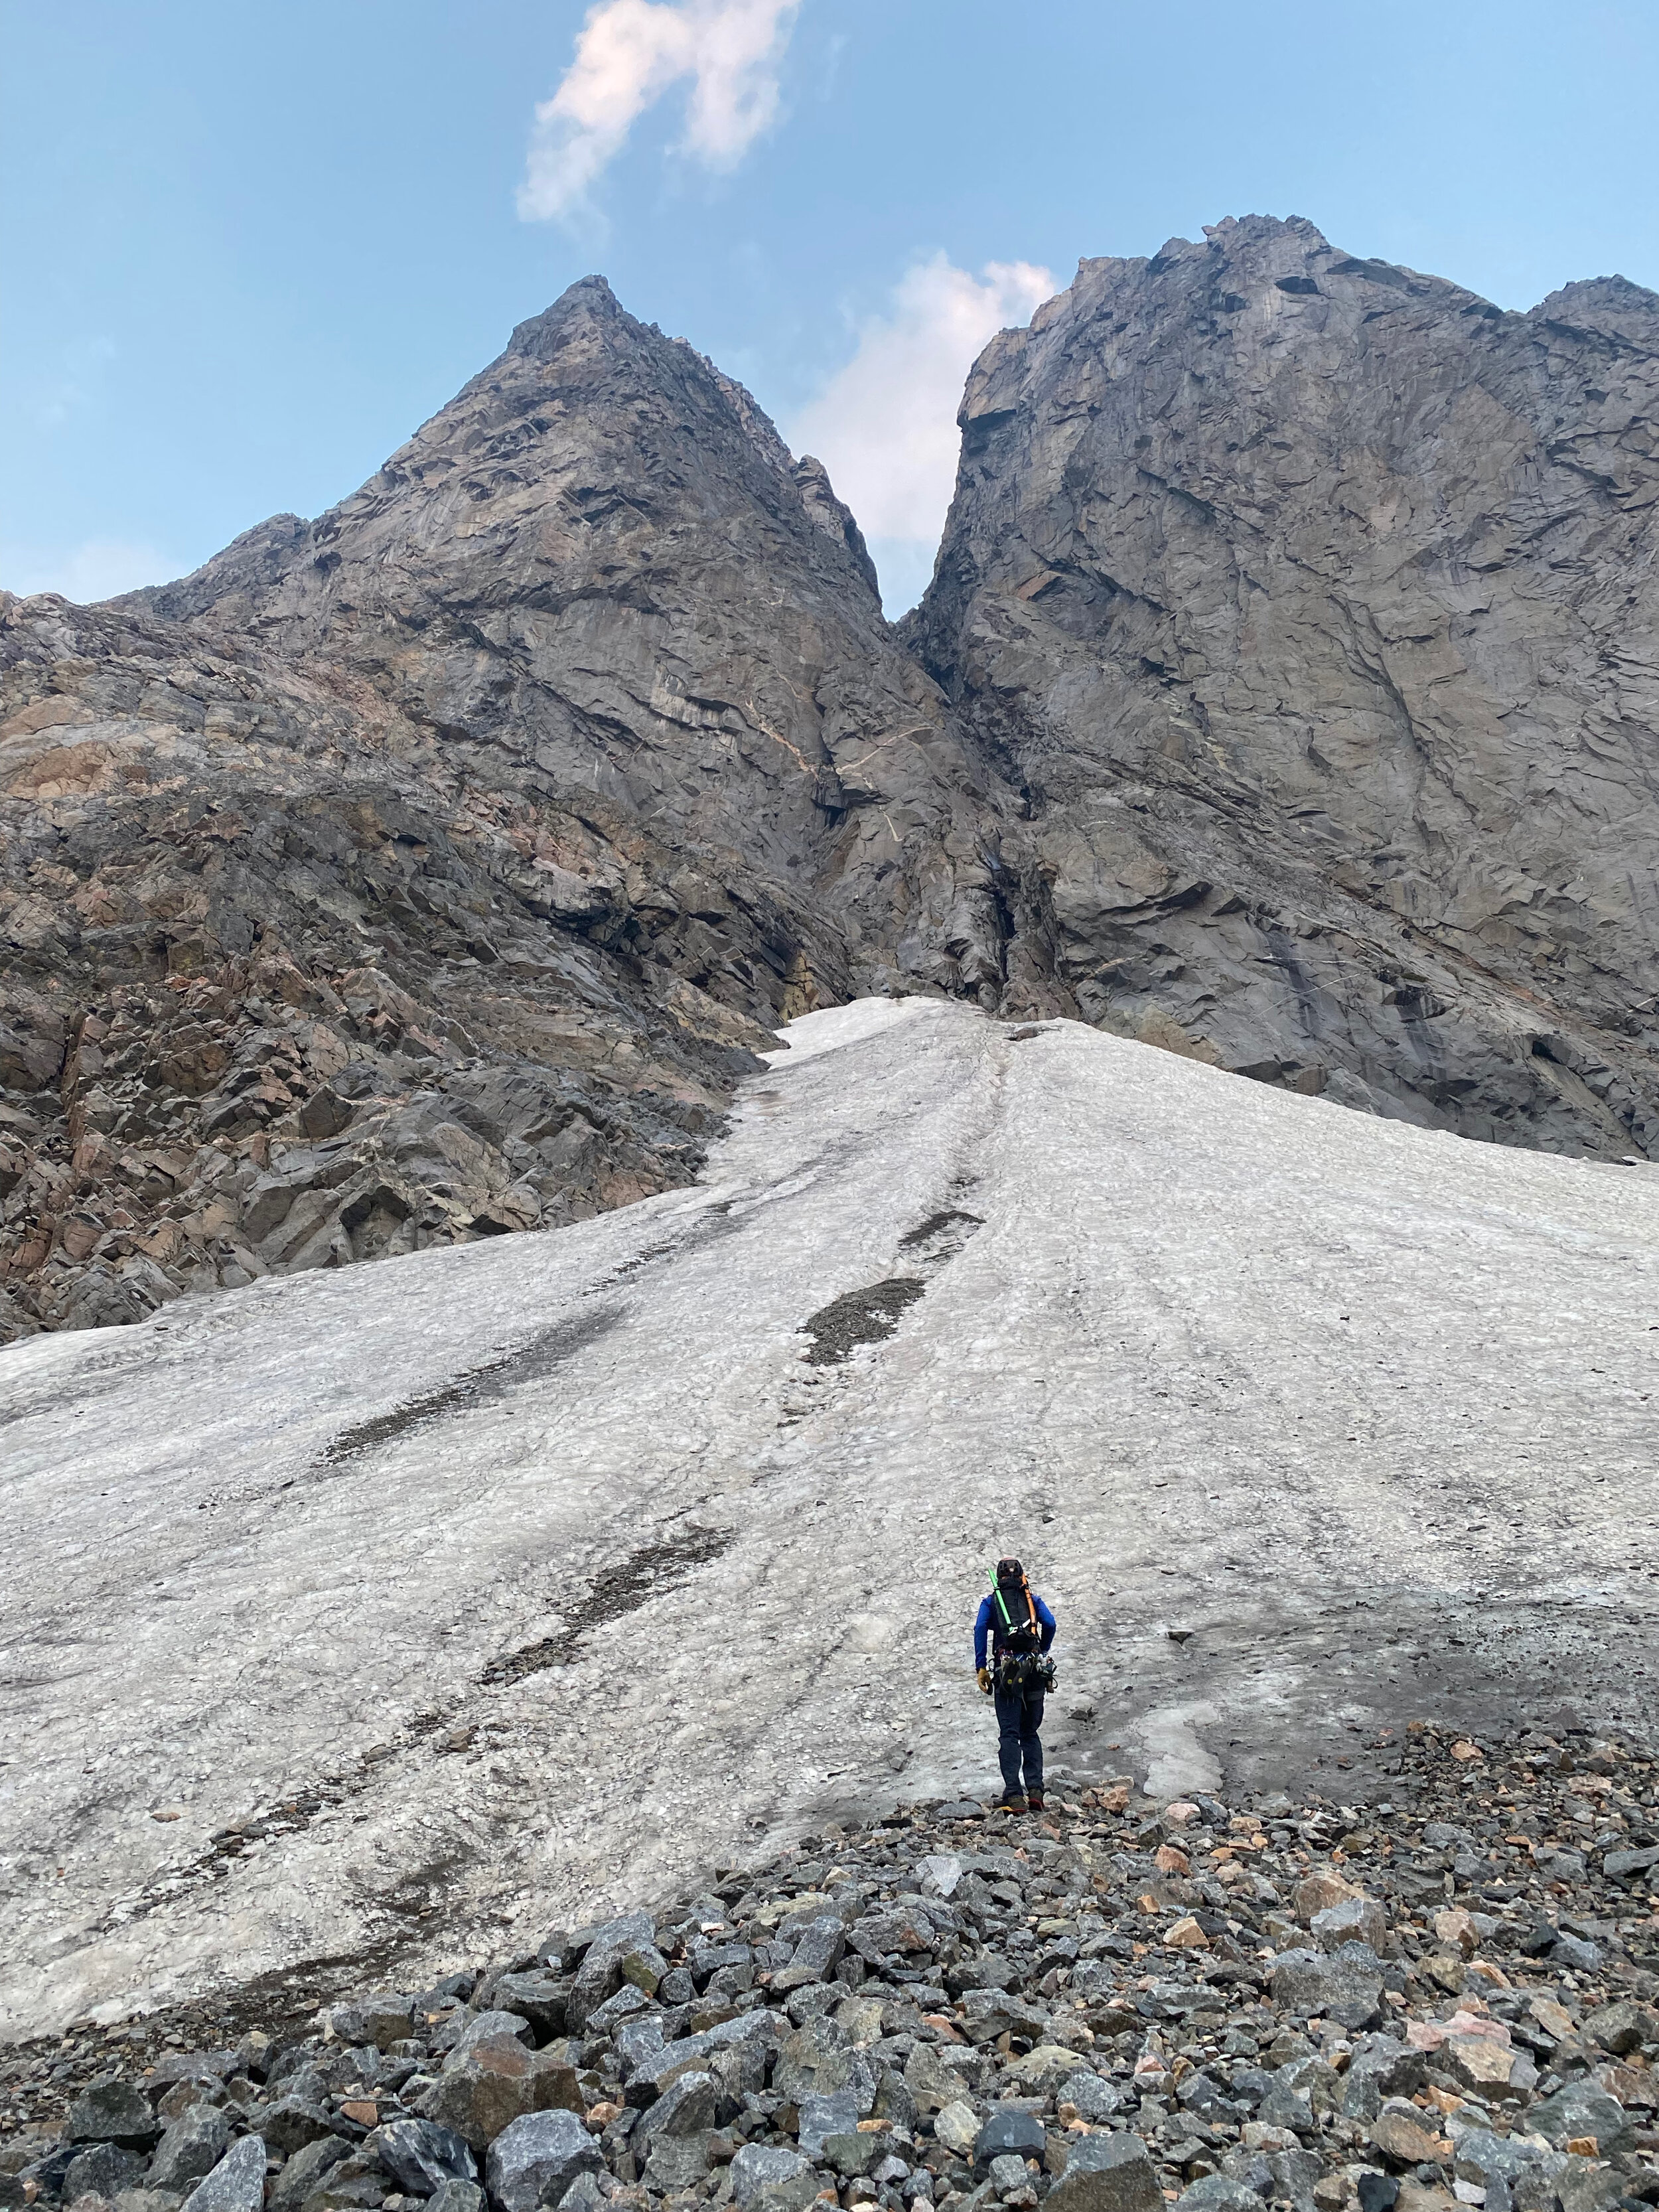 Tucker at the base of the snowfield below Lunar Arete